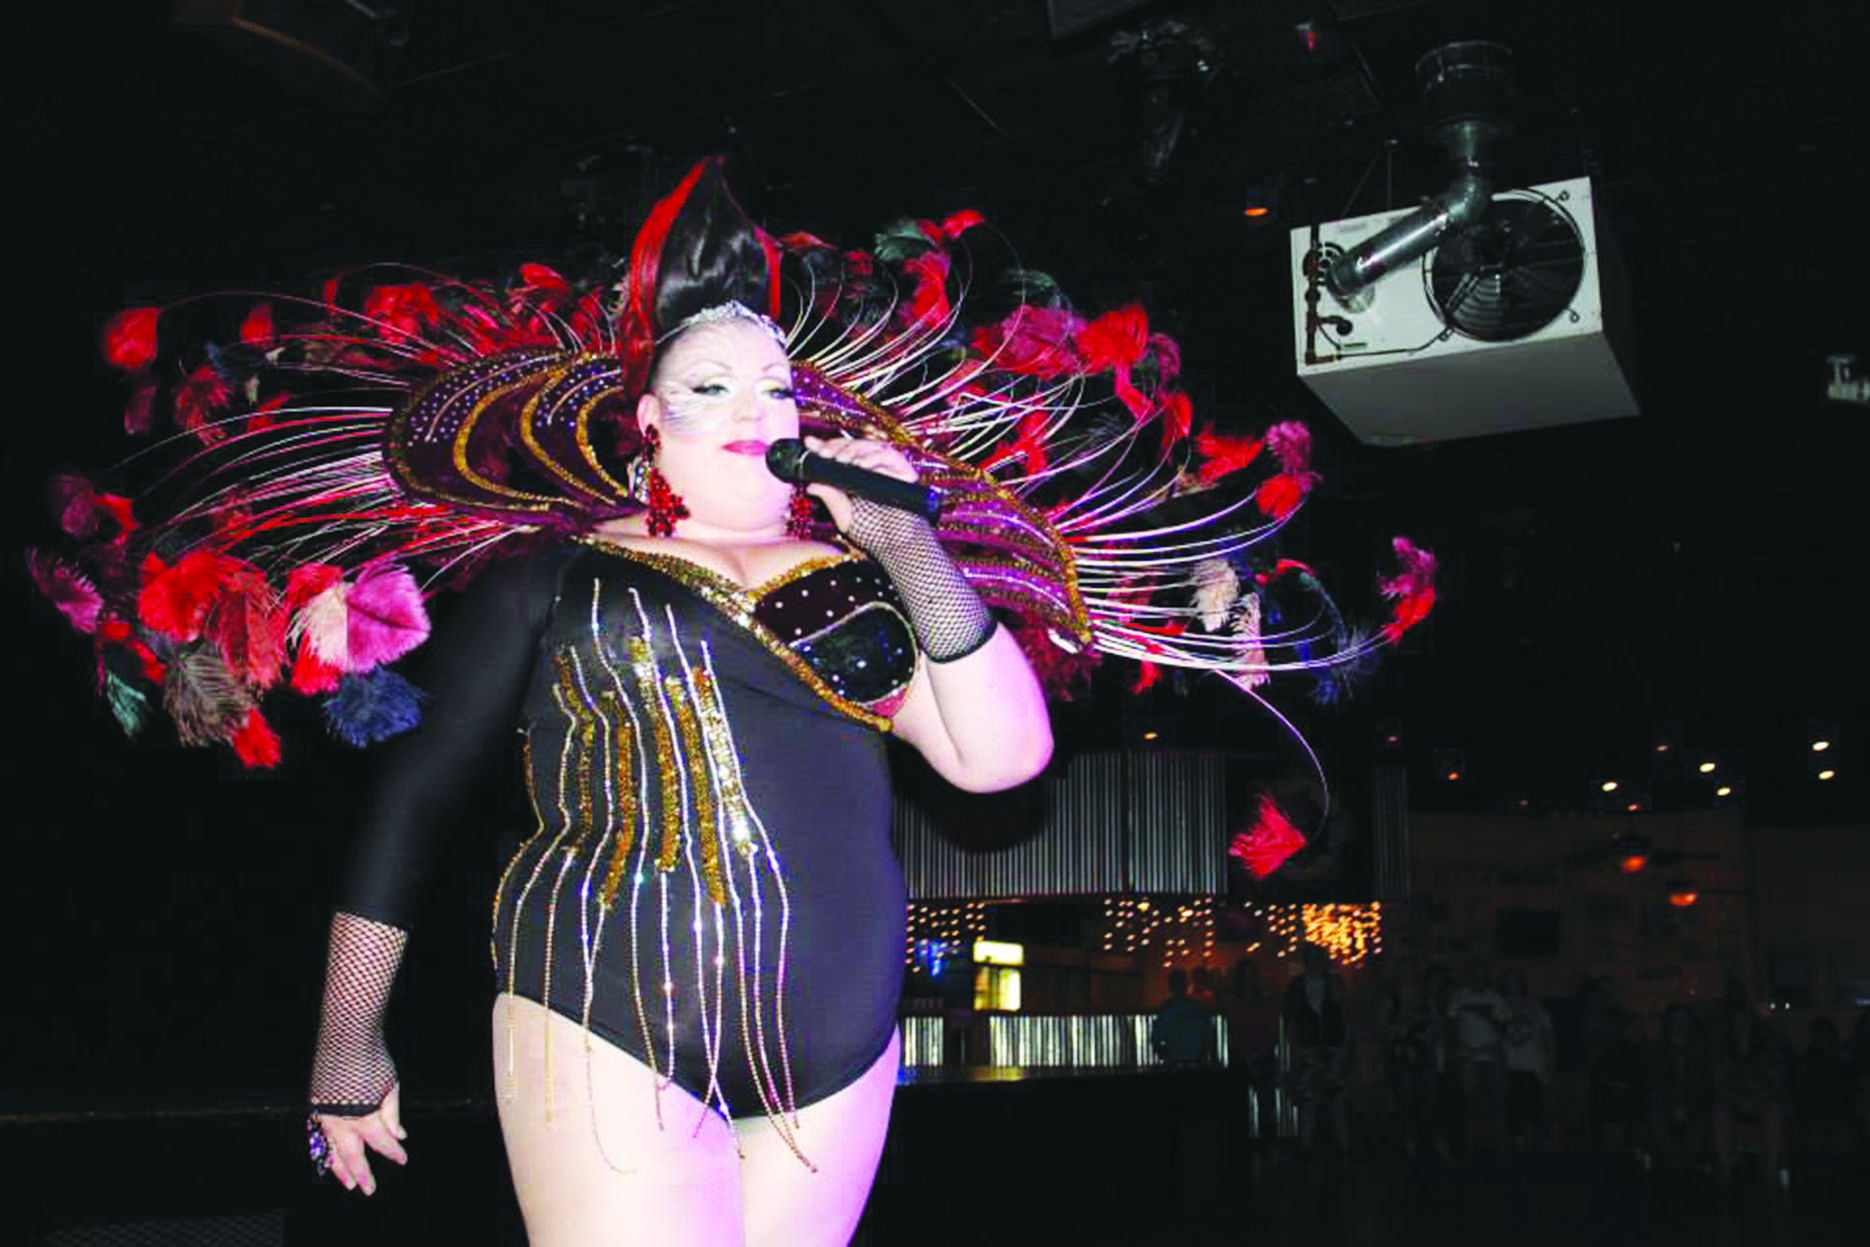 Final drag show of the year hits the runway